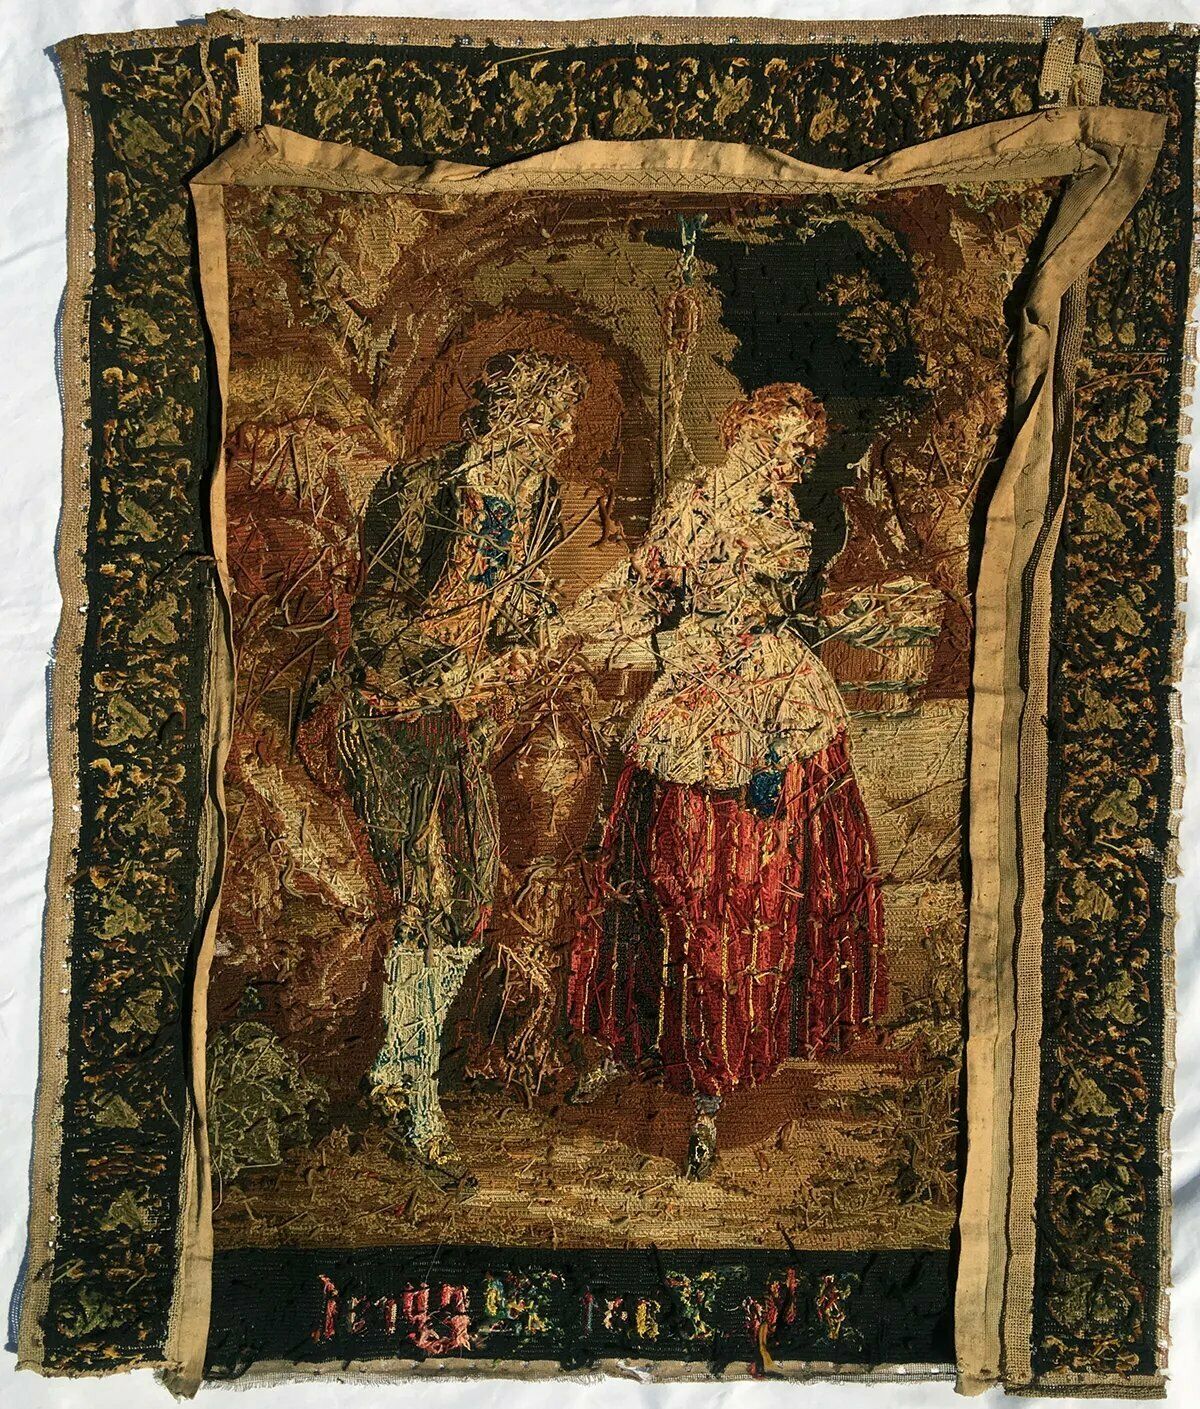 Huge 36" x 30" Early 1800s Antique Needlepoint Tapestry, Pettipoint Berlin Work